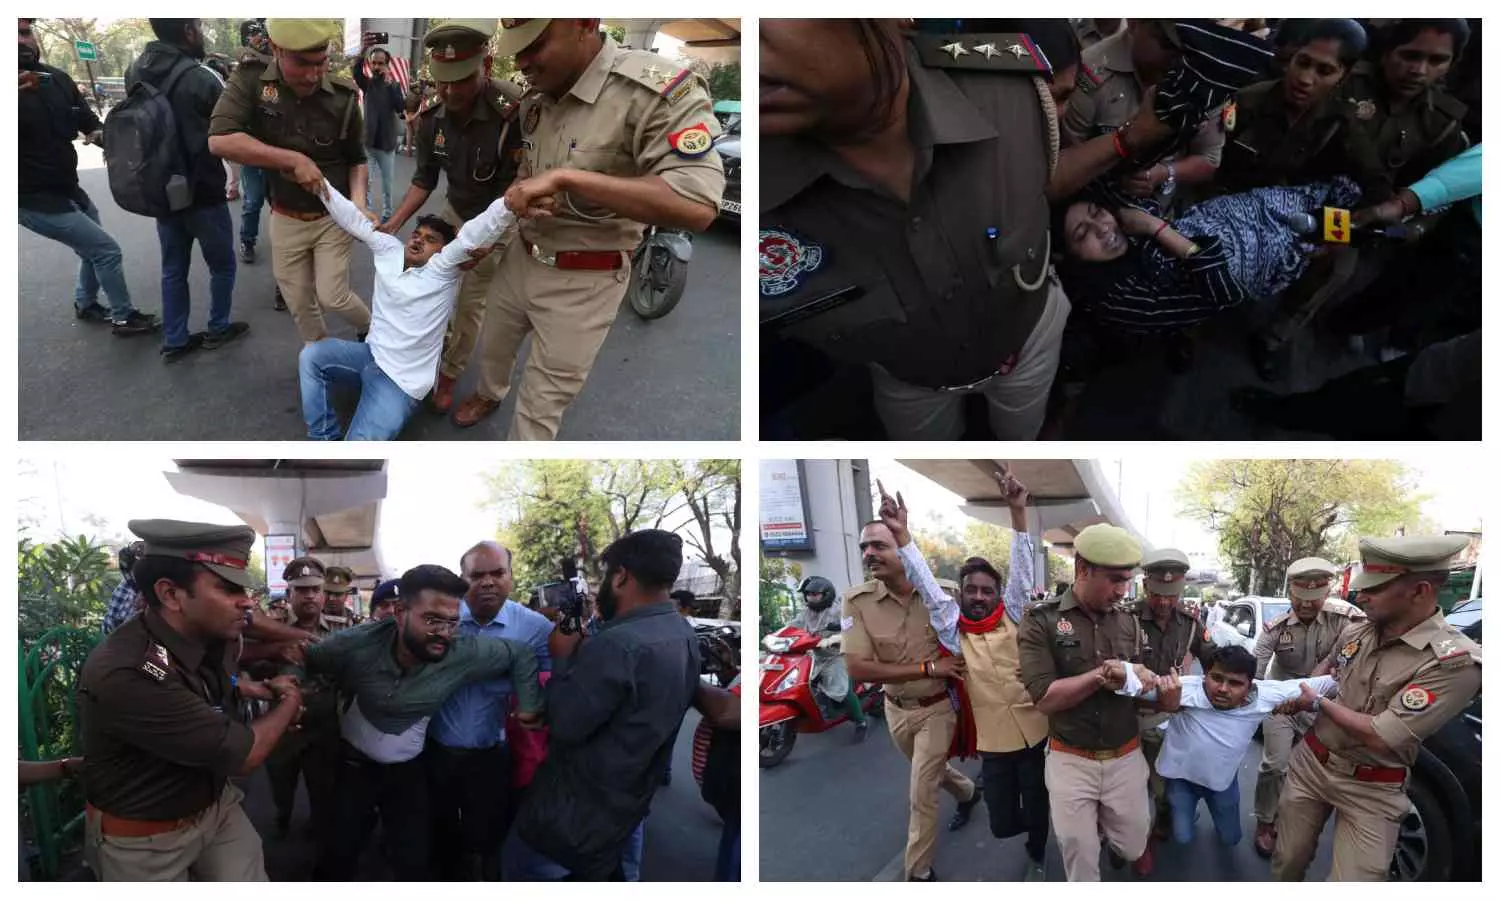 aap protest, cm arvind kejriwal arrest, lucknow news, aap leaders protest in lucknow